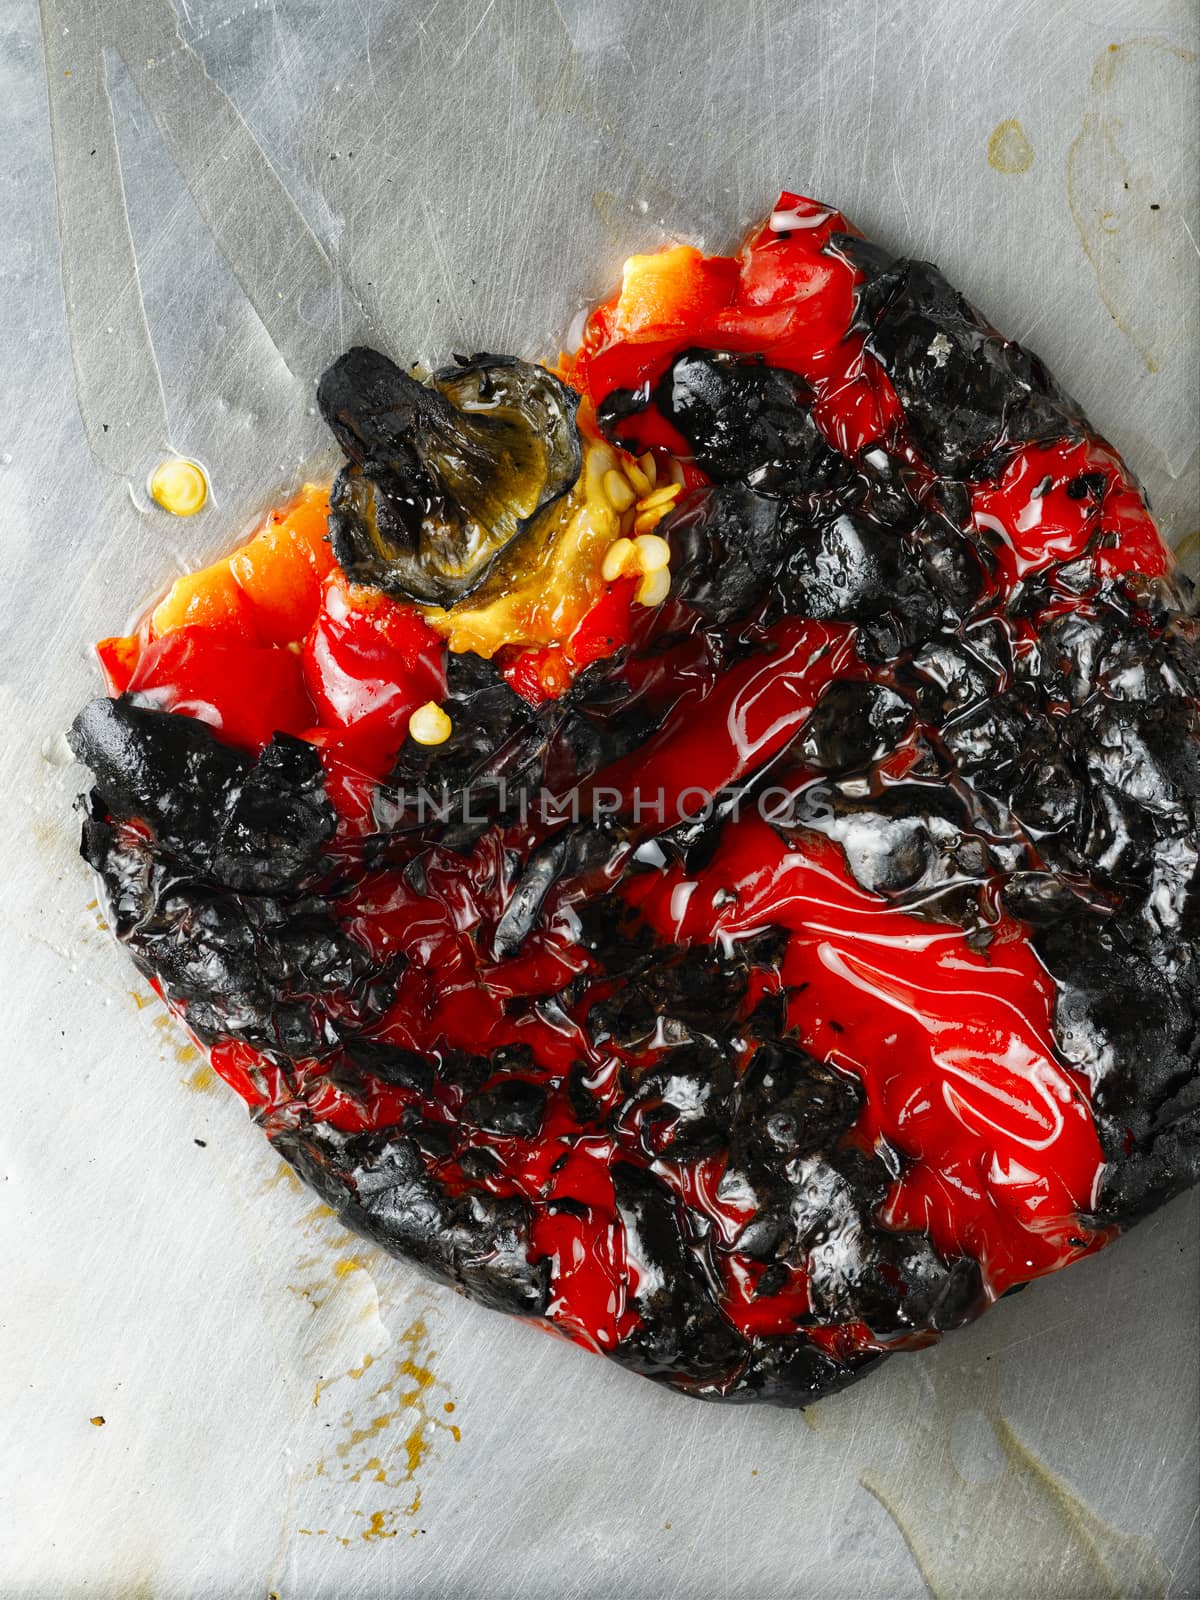 roasted bell peppers by zkruger